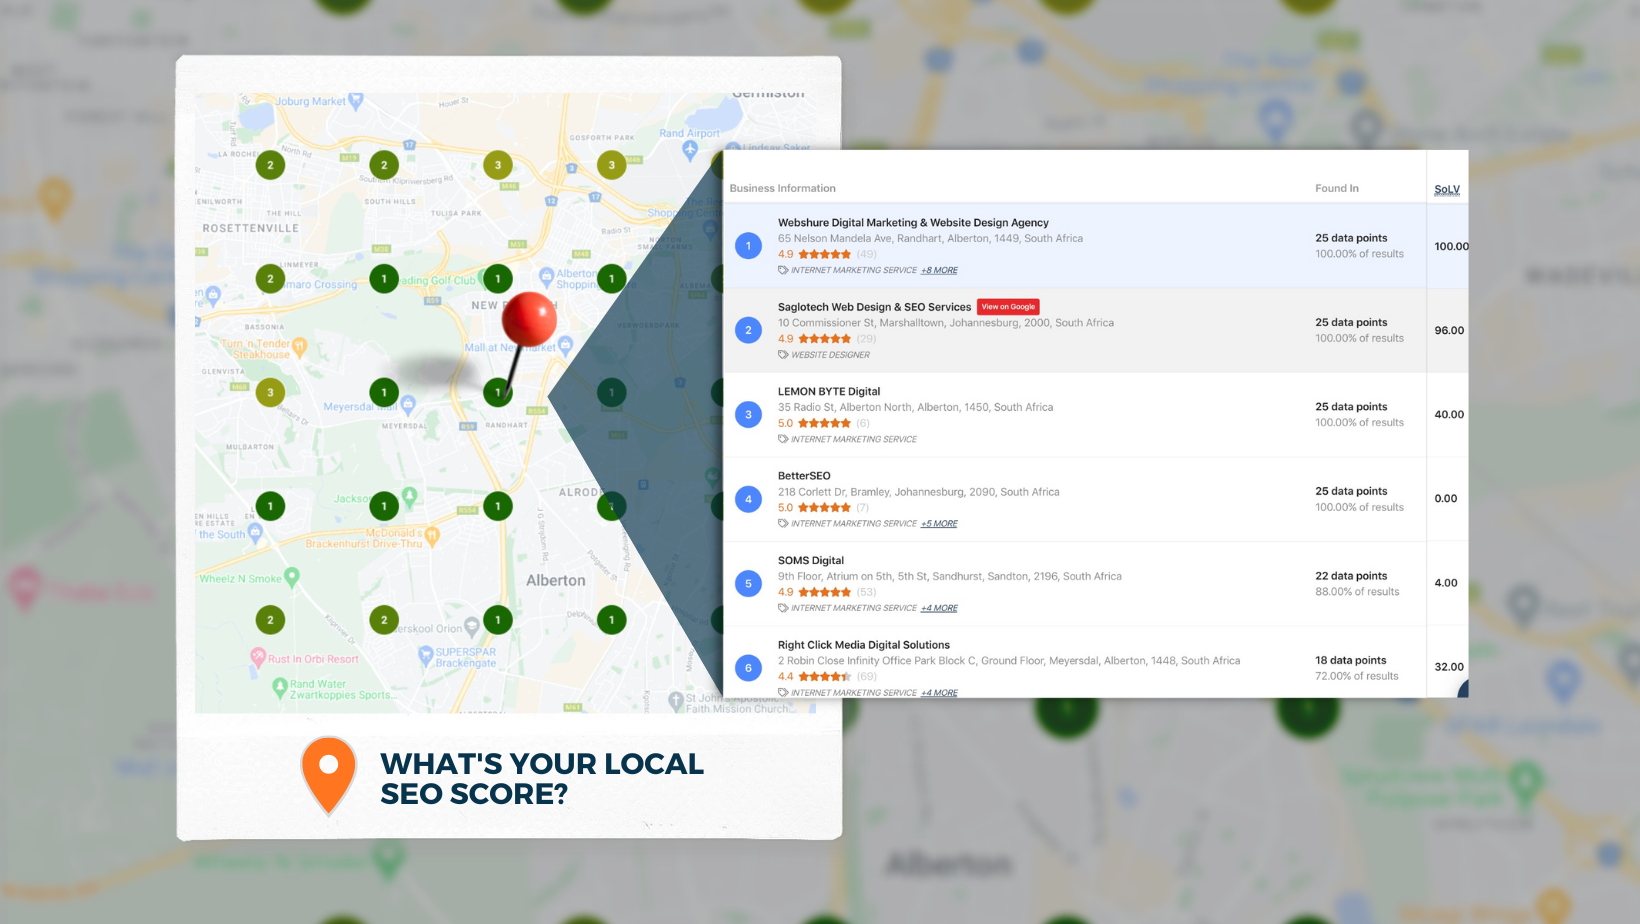 Local SEO - Webshure's local SEO (See Image)